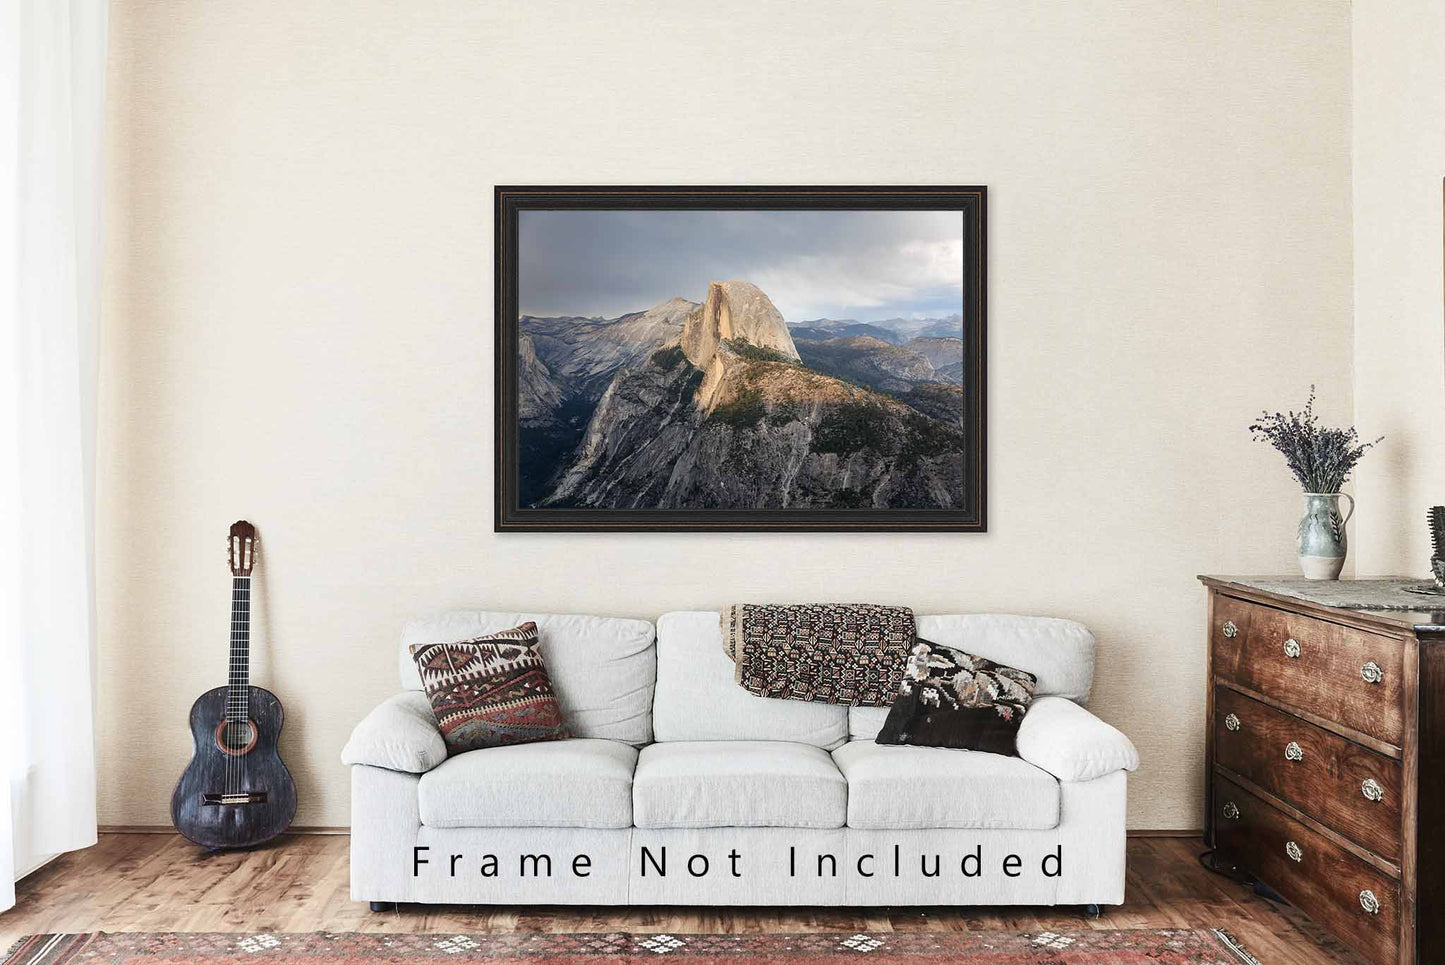 Sierra Nevada Photography Print (Not Framed) Picture of Half Dome Illuminated by Sunlight Under Moody Sky in California Yosemite National Park Wall Art Nature Decor